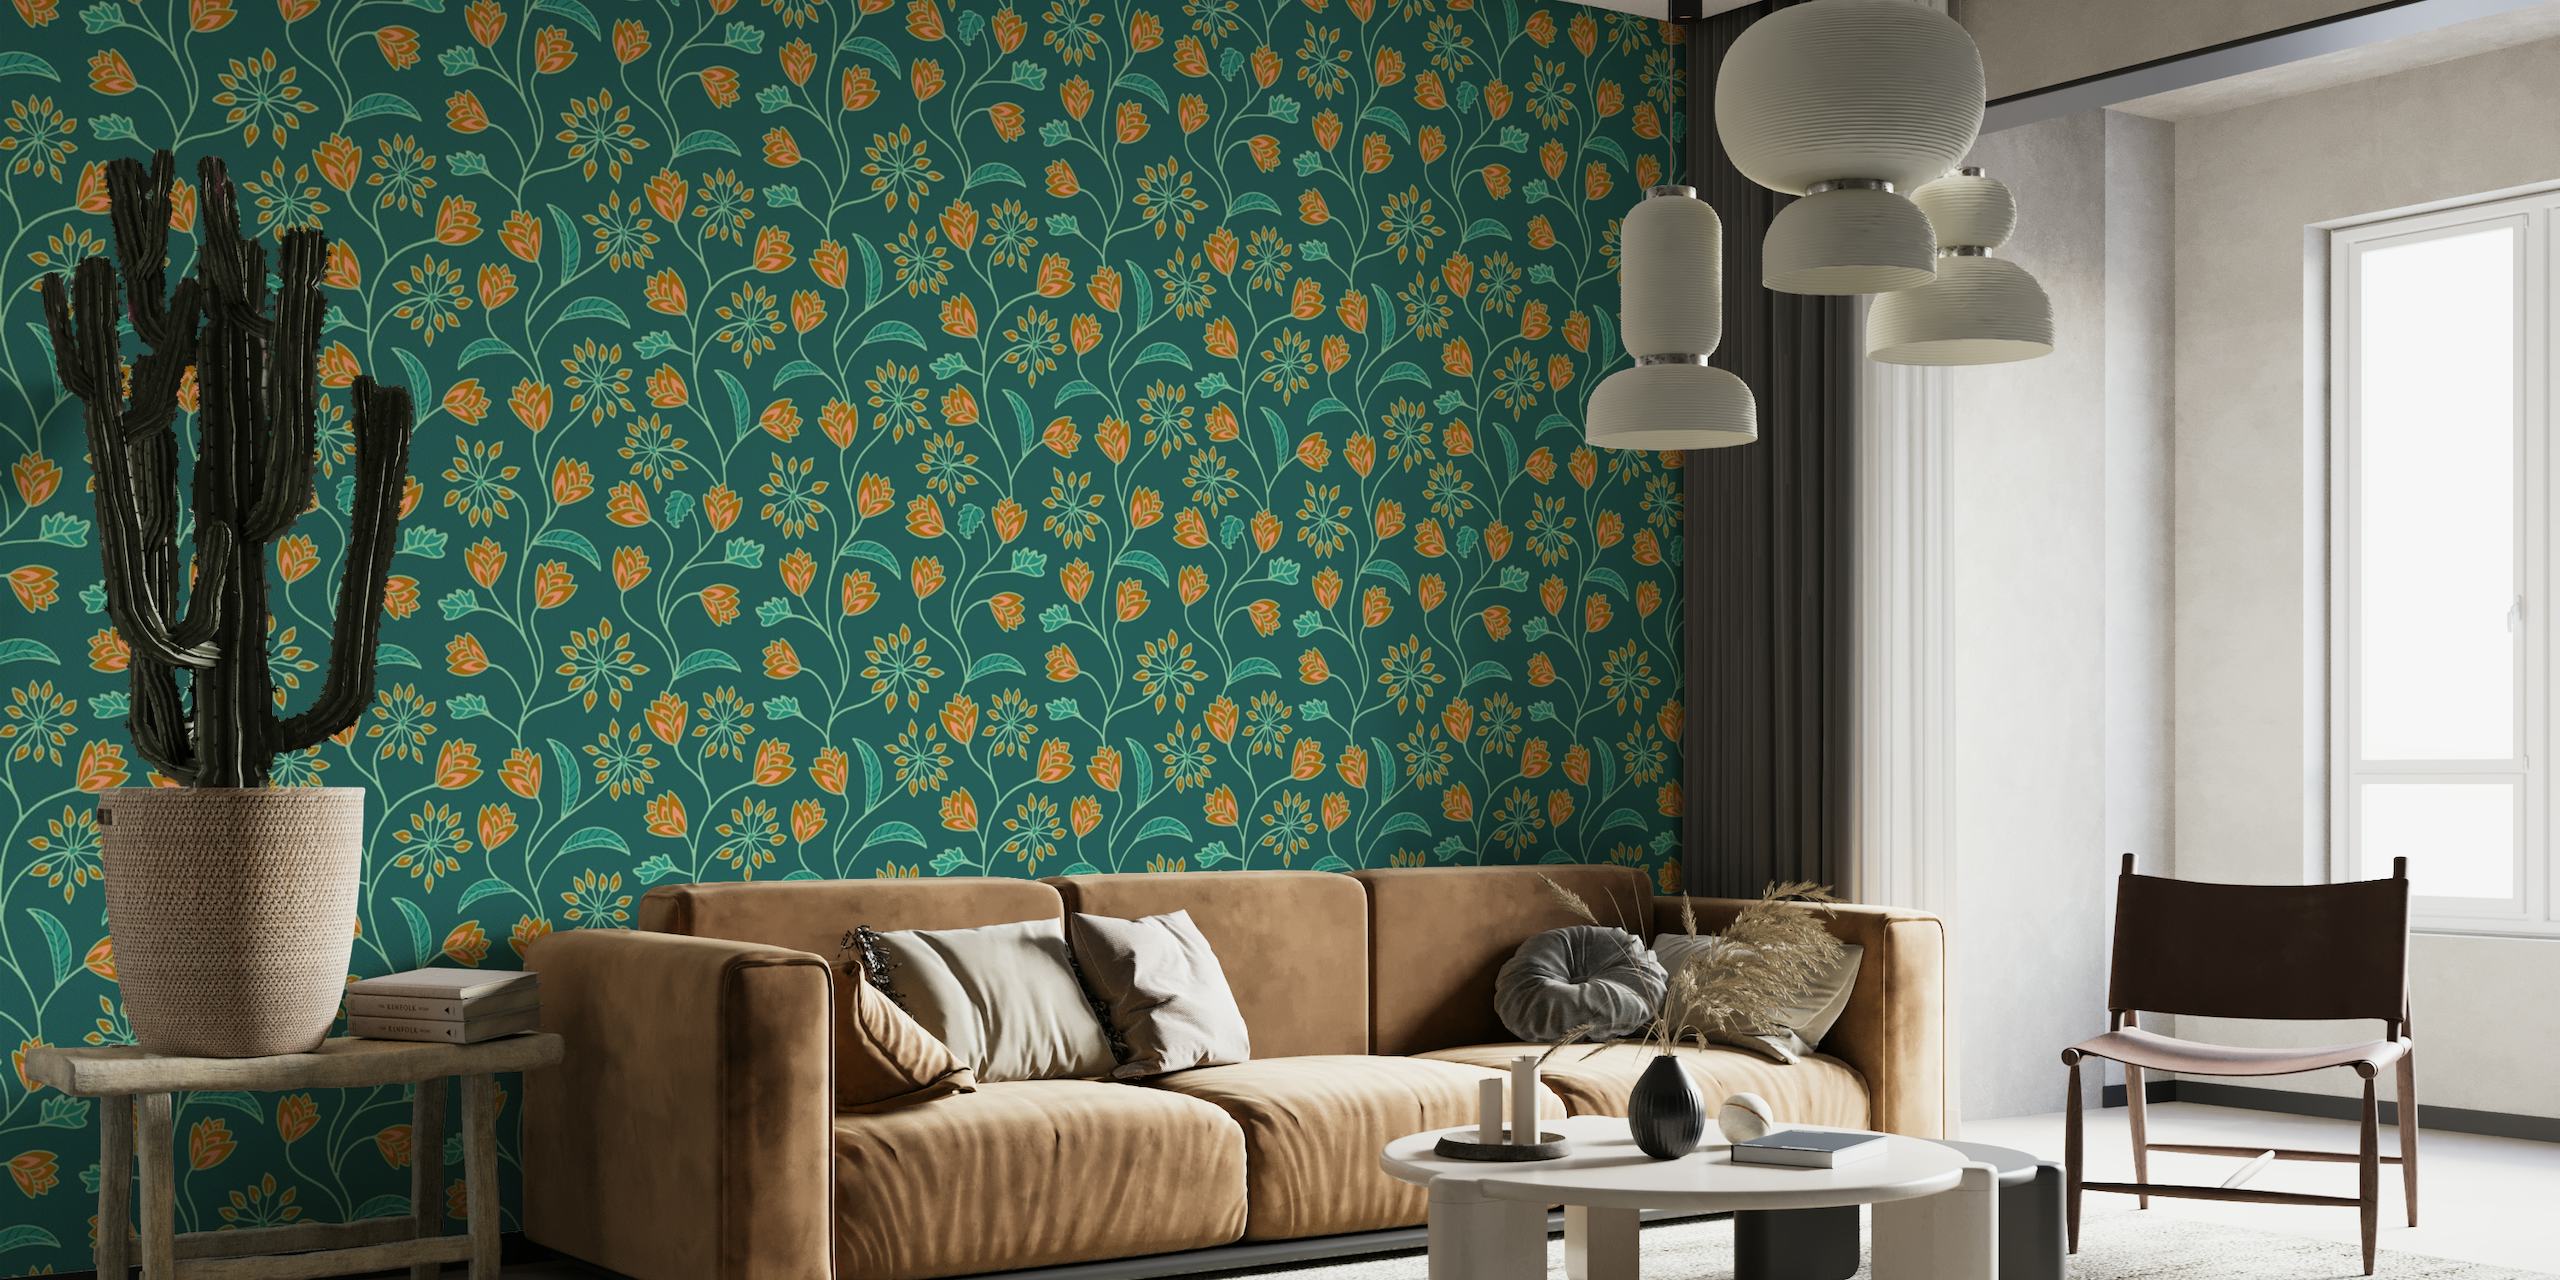 TANGLED Climbing Flower Vines wall mural in teal green with orange and yellow flowers